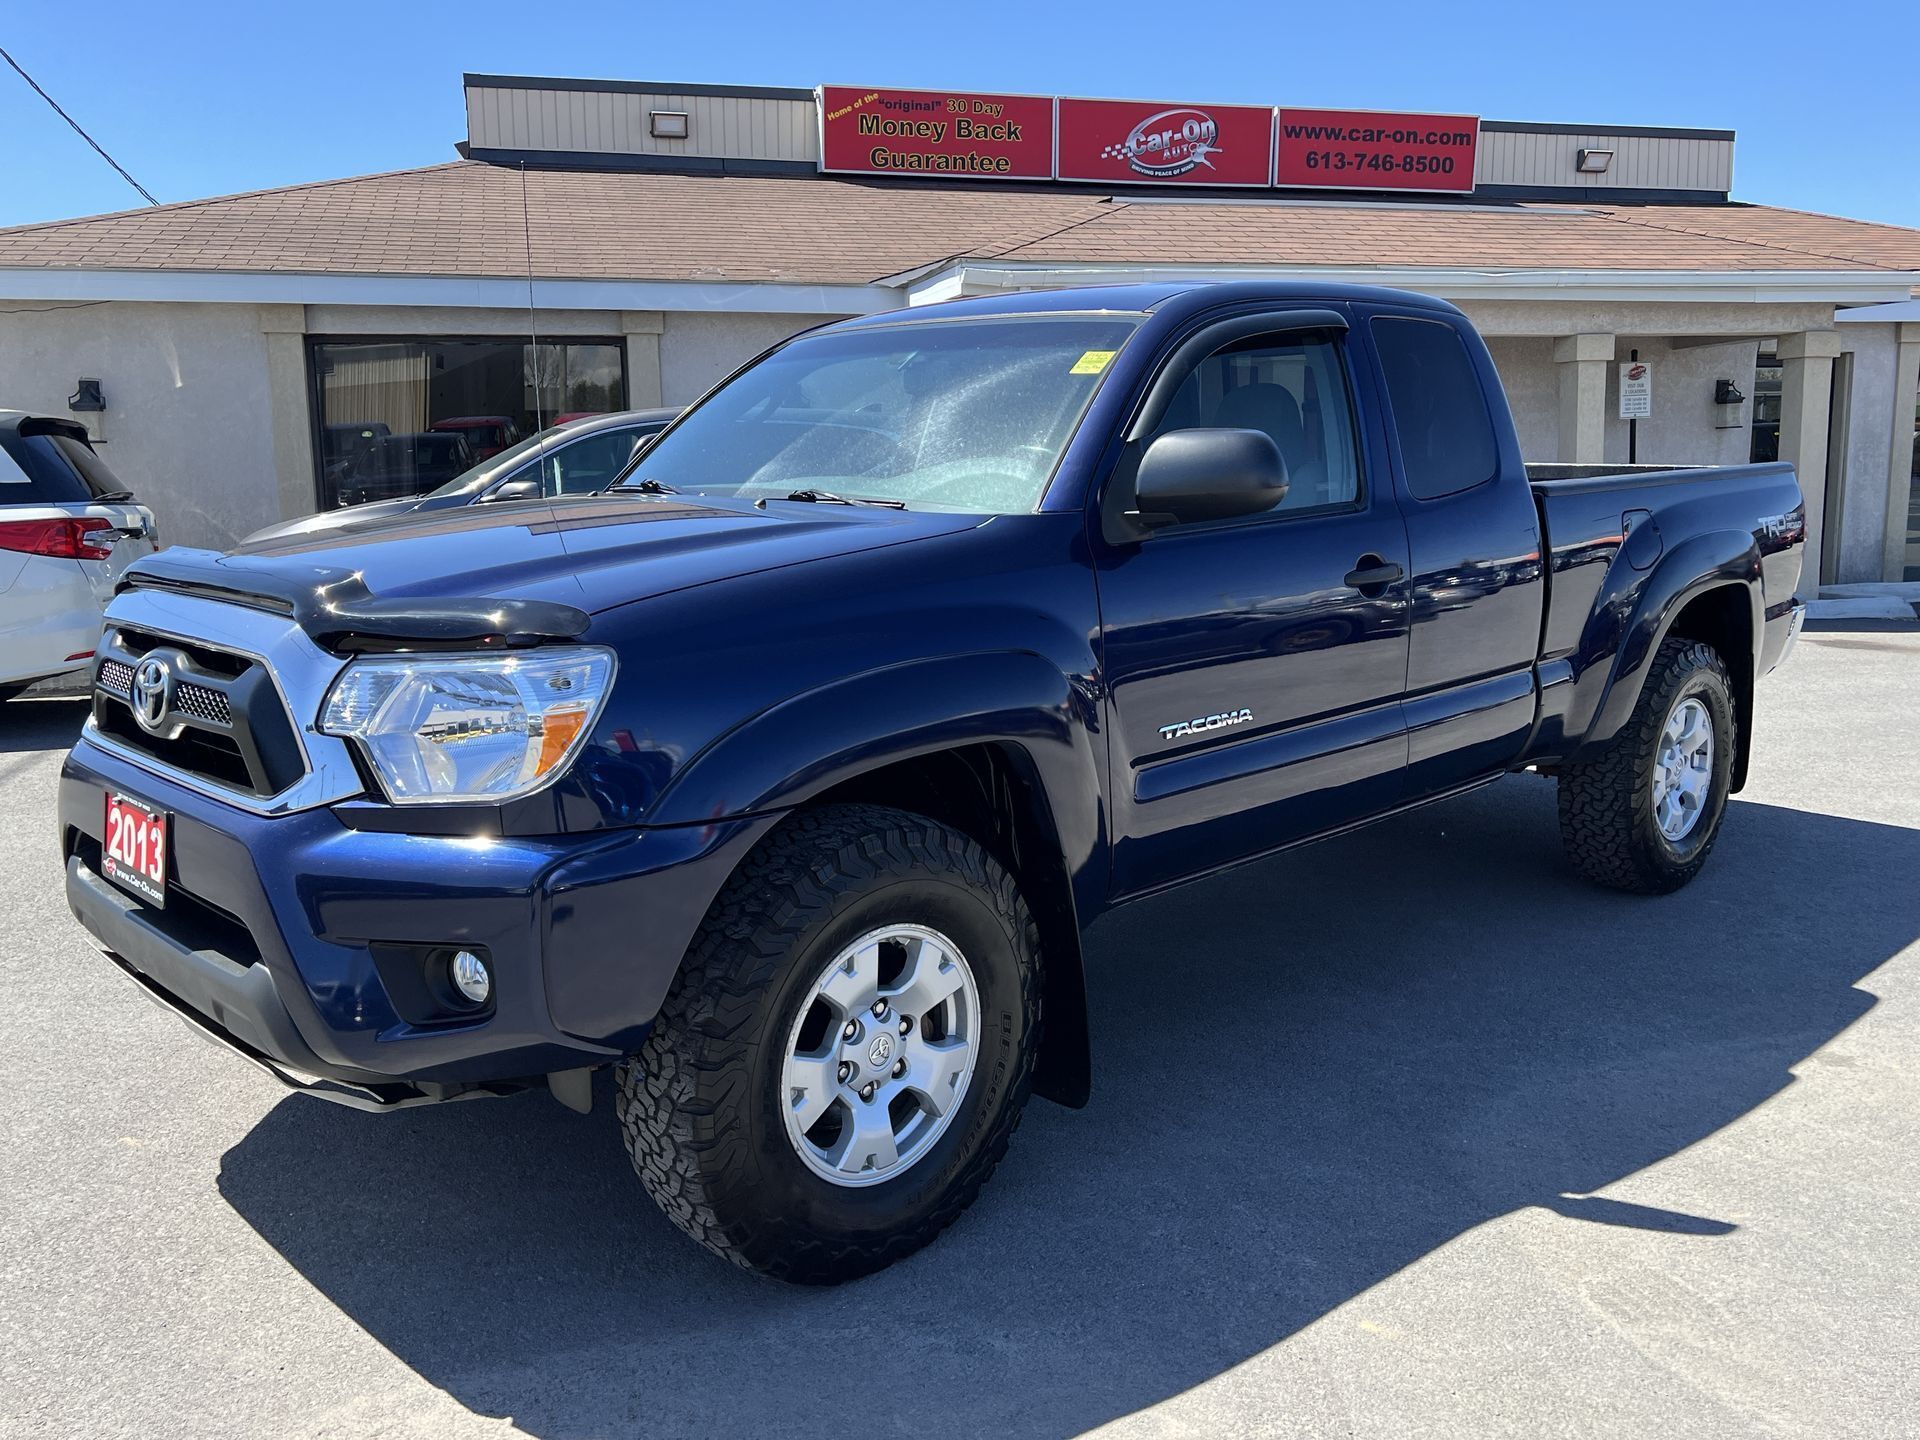 2013 Toyota Tacoma V6 TRD OFF ROAD 4x4| REAR CAM| BLUETOOTH| LOW KMS!